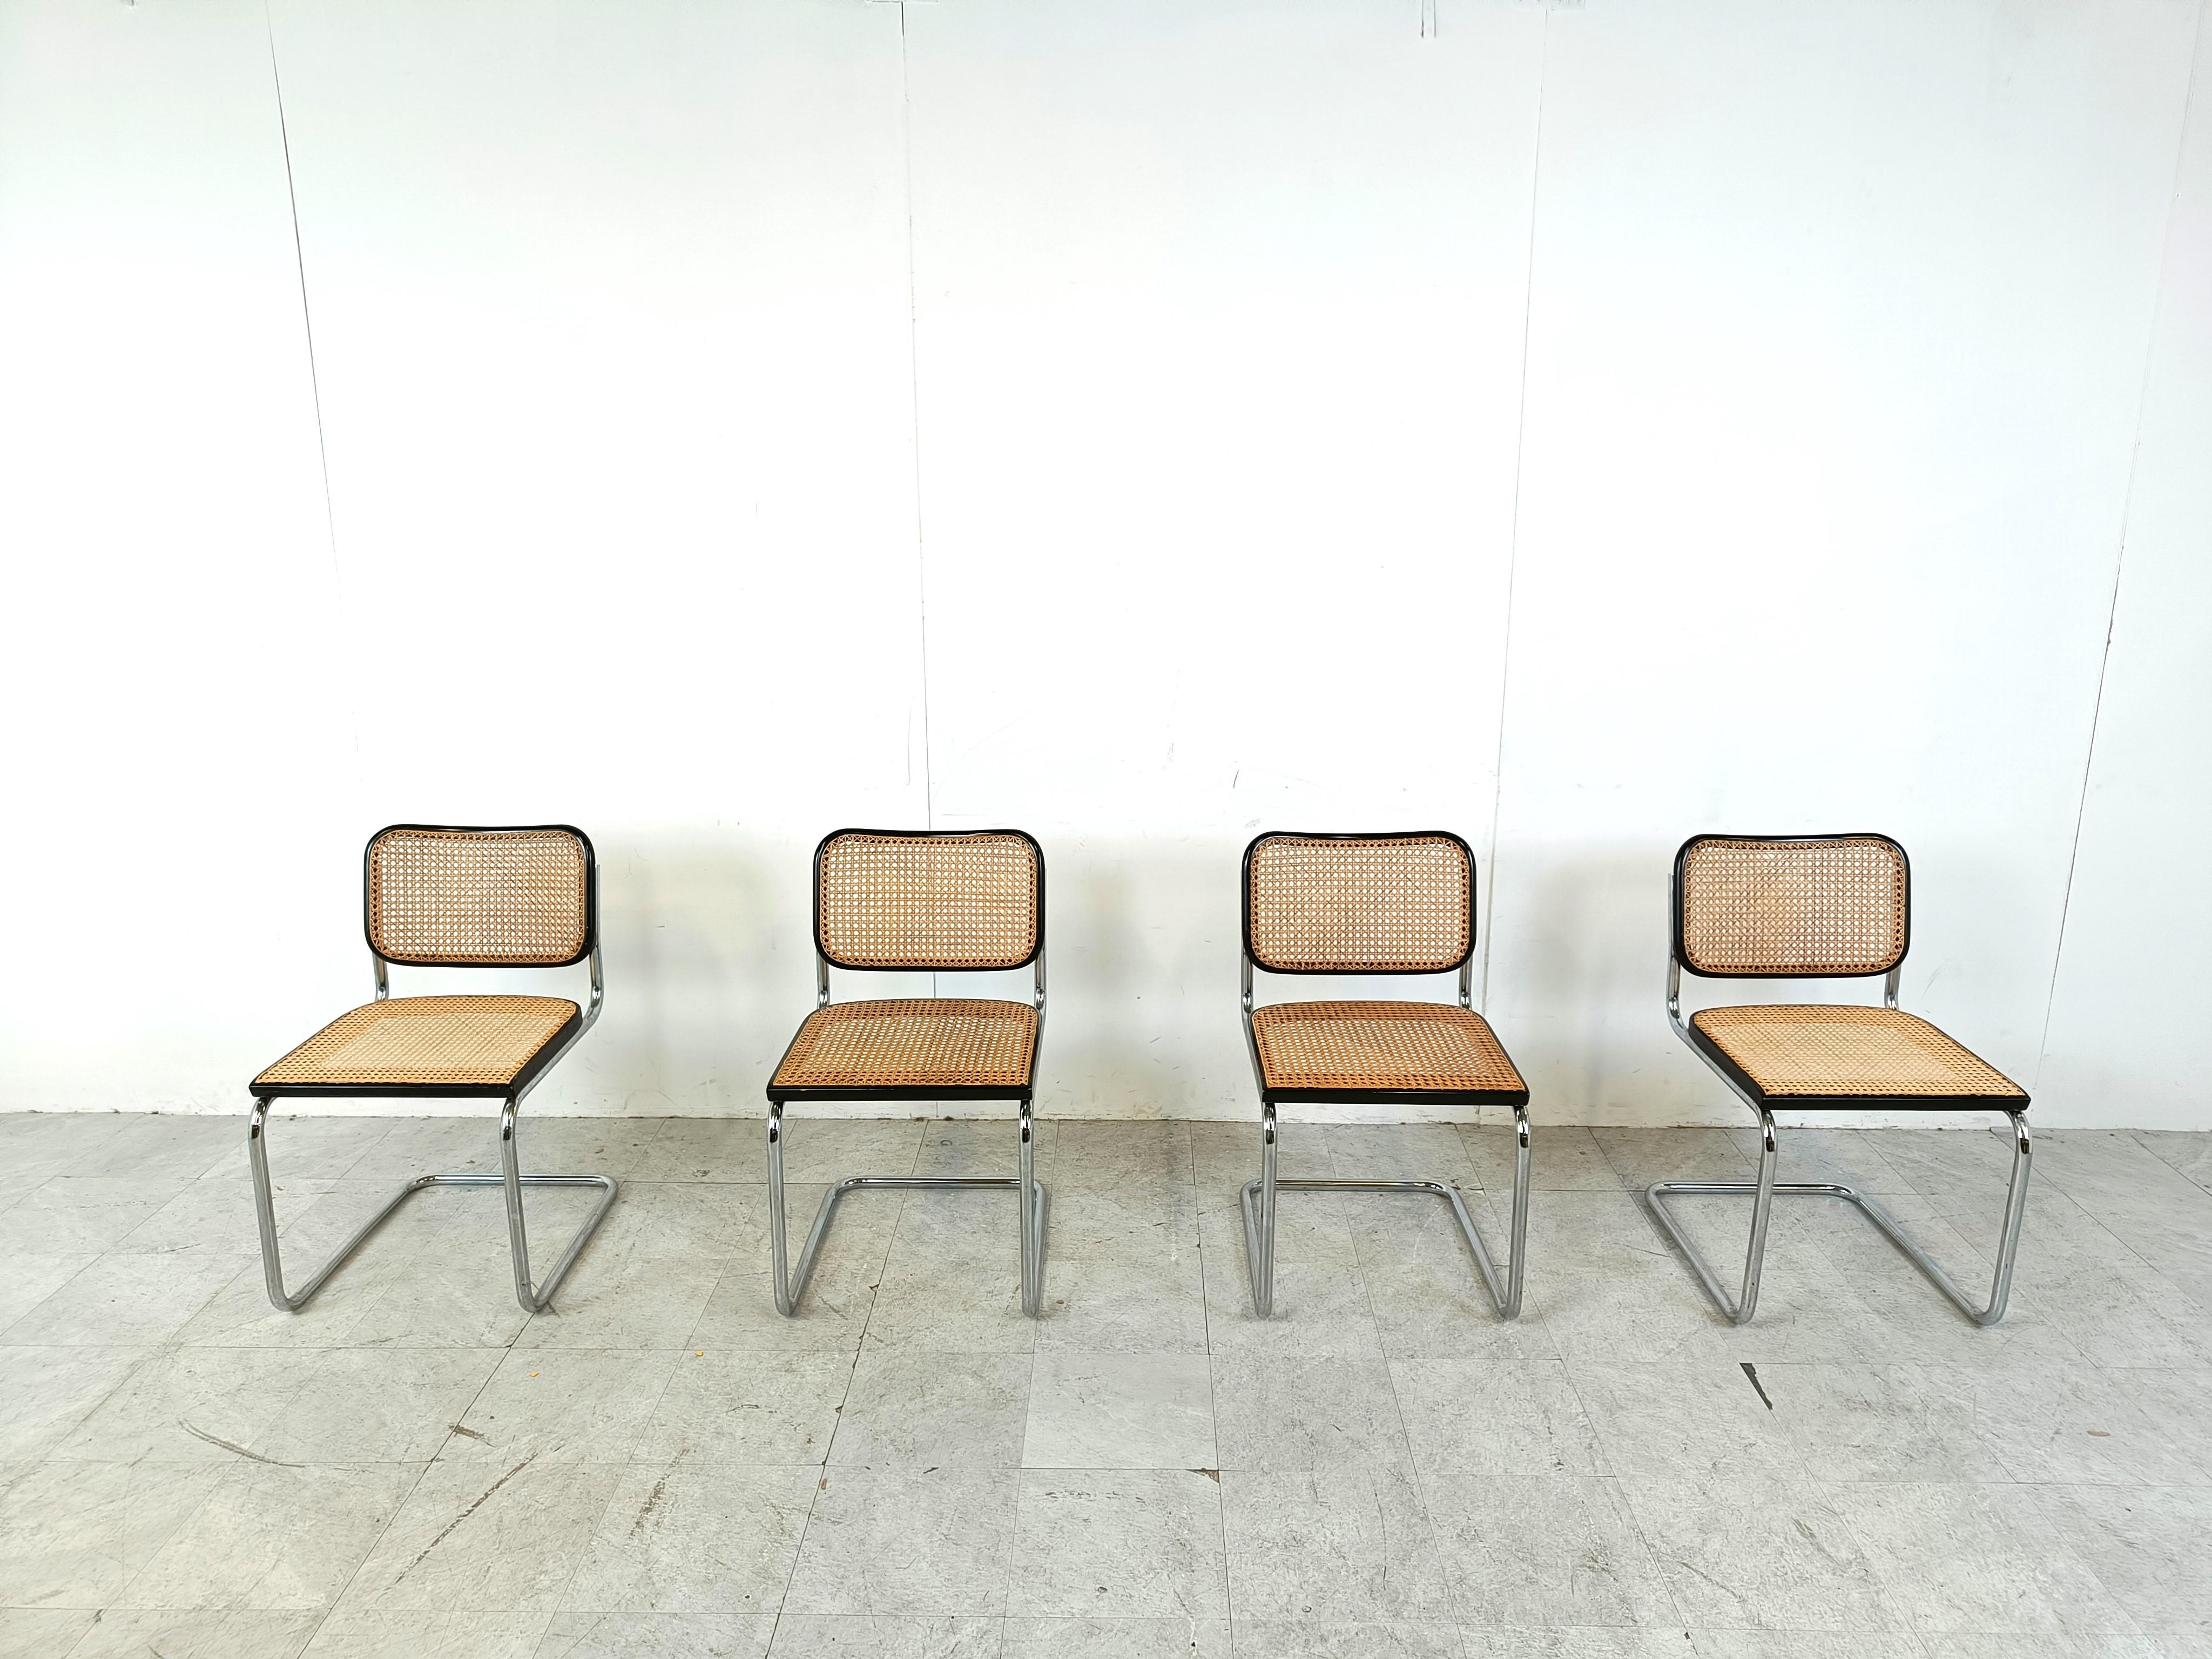 Set of 4 'cesca'  S32 bauhaus design chairs. Original design dates from 1926 by Marcel breuer.

These where produced and labelled by Gavina in the 1970s

Tubular chrome frame, cane seats and black lacquered wood.

Good condition with normal age